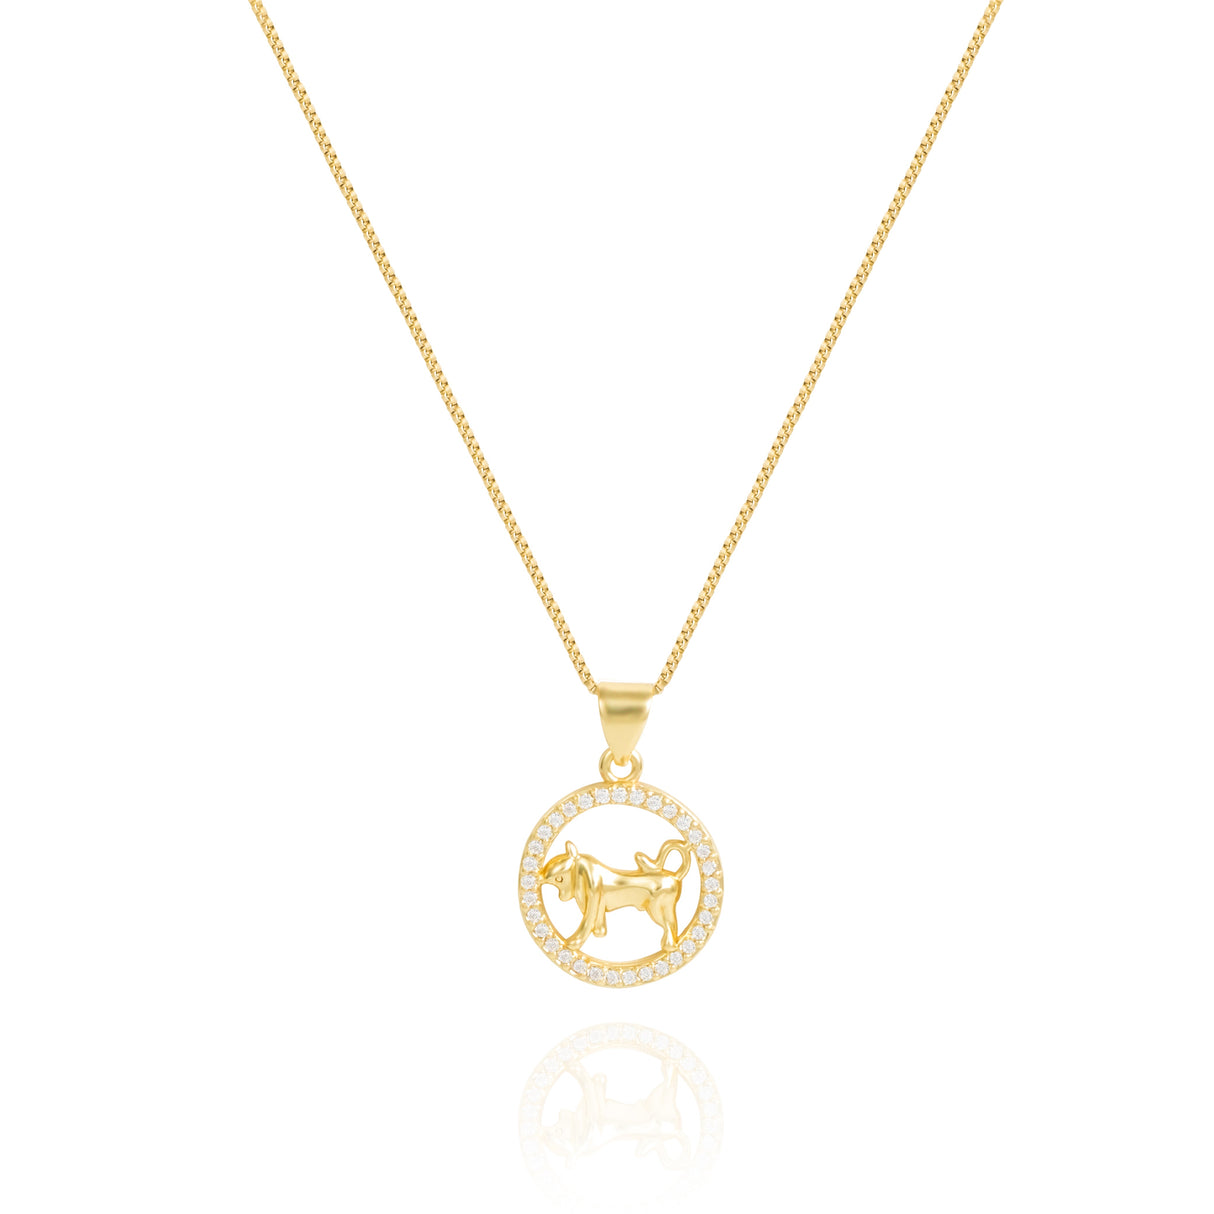 14K Gold Plated 12 Constellation Pendant Necklace Circle - GexWorldwide